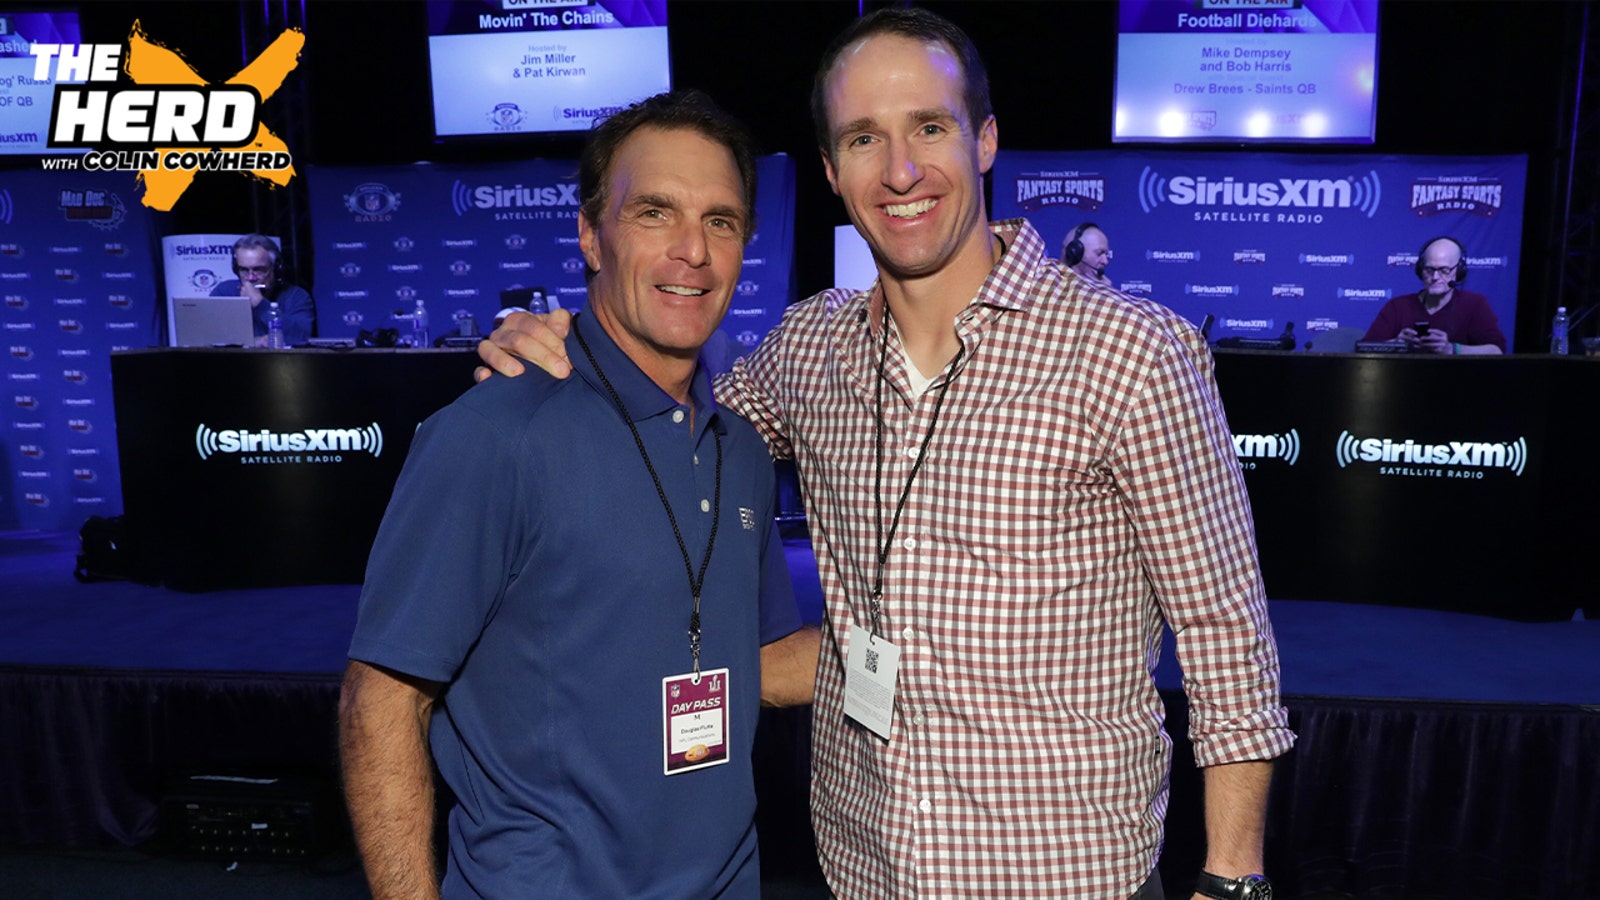 Former New Orleans Saints QB Drew Brees joins Colin Cowherd to discuss why Chargers QB Doug Flutie was such an instrumental part of his success in the NFL.